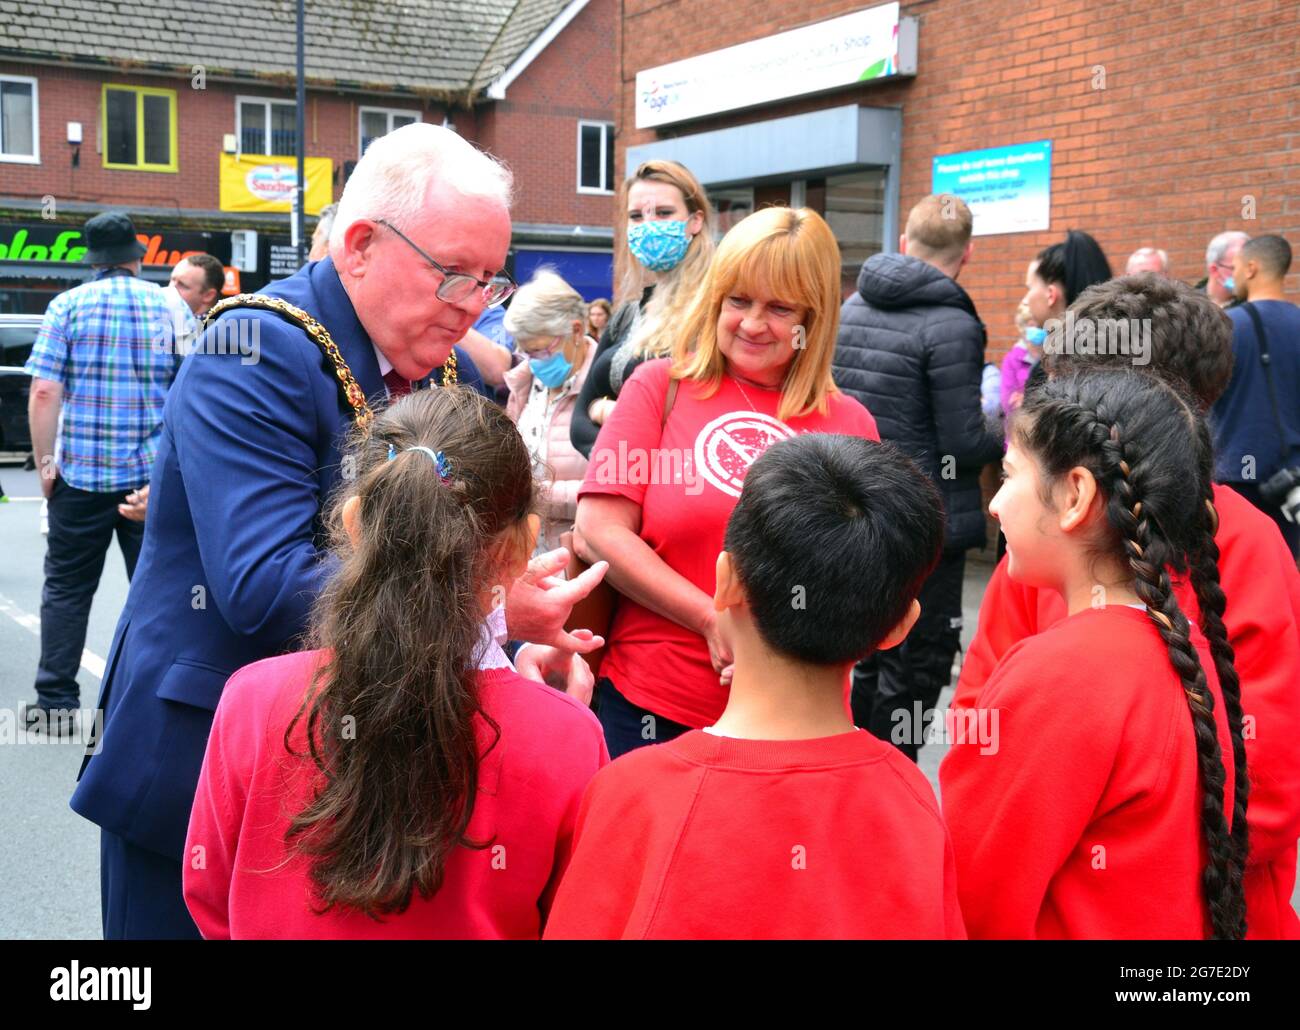 The Lord Mayor of the City of Manchester, Councillor Tommy Judge, talks to children beside the giant Marcus Rashford mural in Withington, Manchester, England, United Kingdom, that was vandalised  with abusive graffiti after England's Euro2020 football loss  on July 11th, 2021. The mural was created by French-born street artist Akse P19 on the wall of the Coffee House Cafe on Copson Street. Marcus Rashford is a Manchester United football player. Akse fully repaired the damaged mural by 13th July, 2021. Picture date: July 13th, 2021. Stock Photo